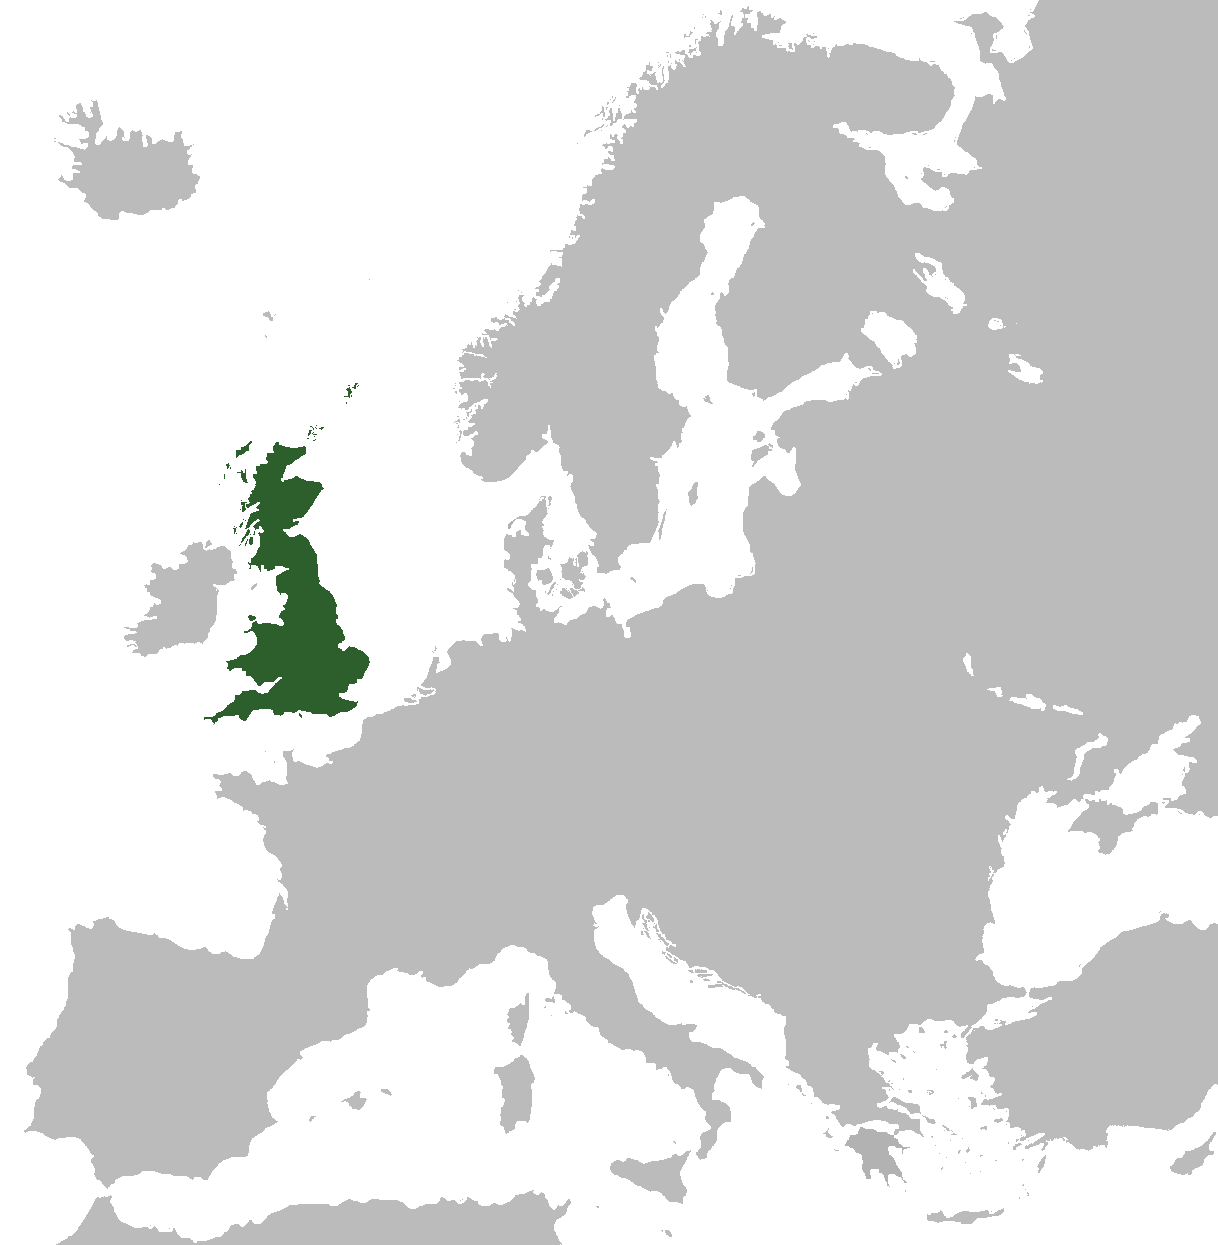 Kingdom of Great Britain between 1707 and 1800